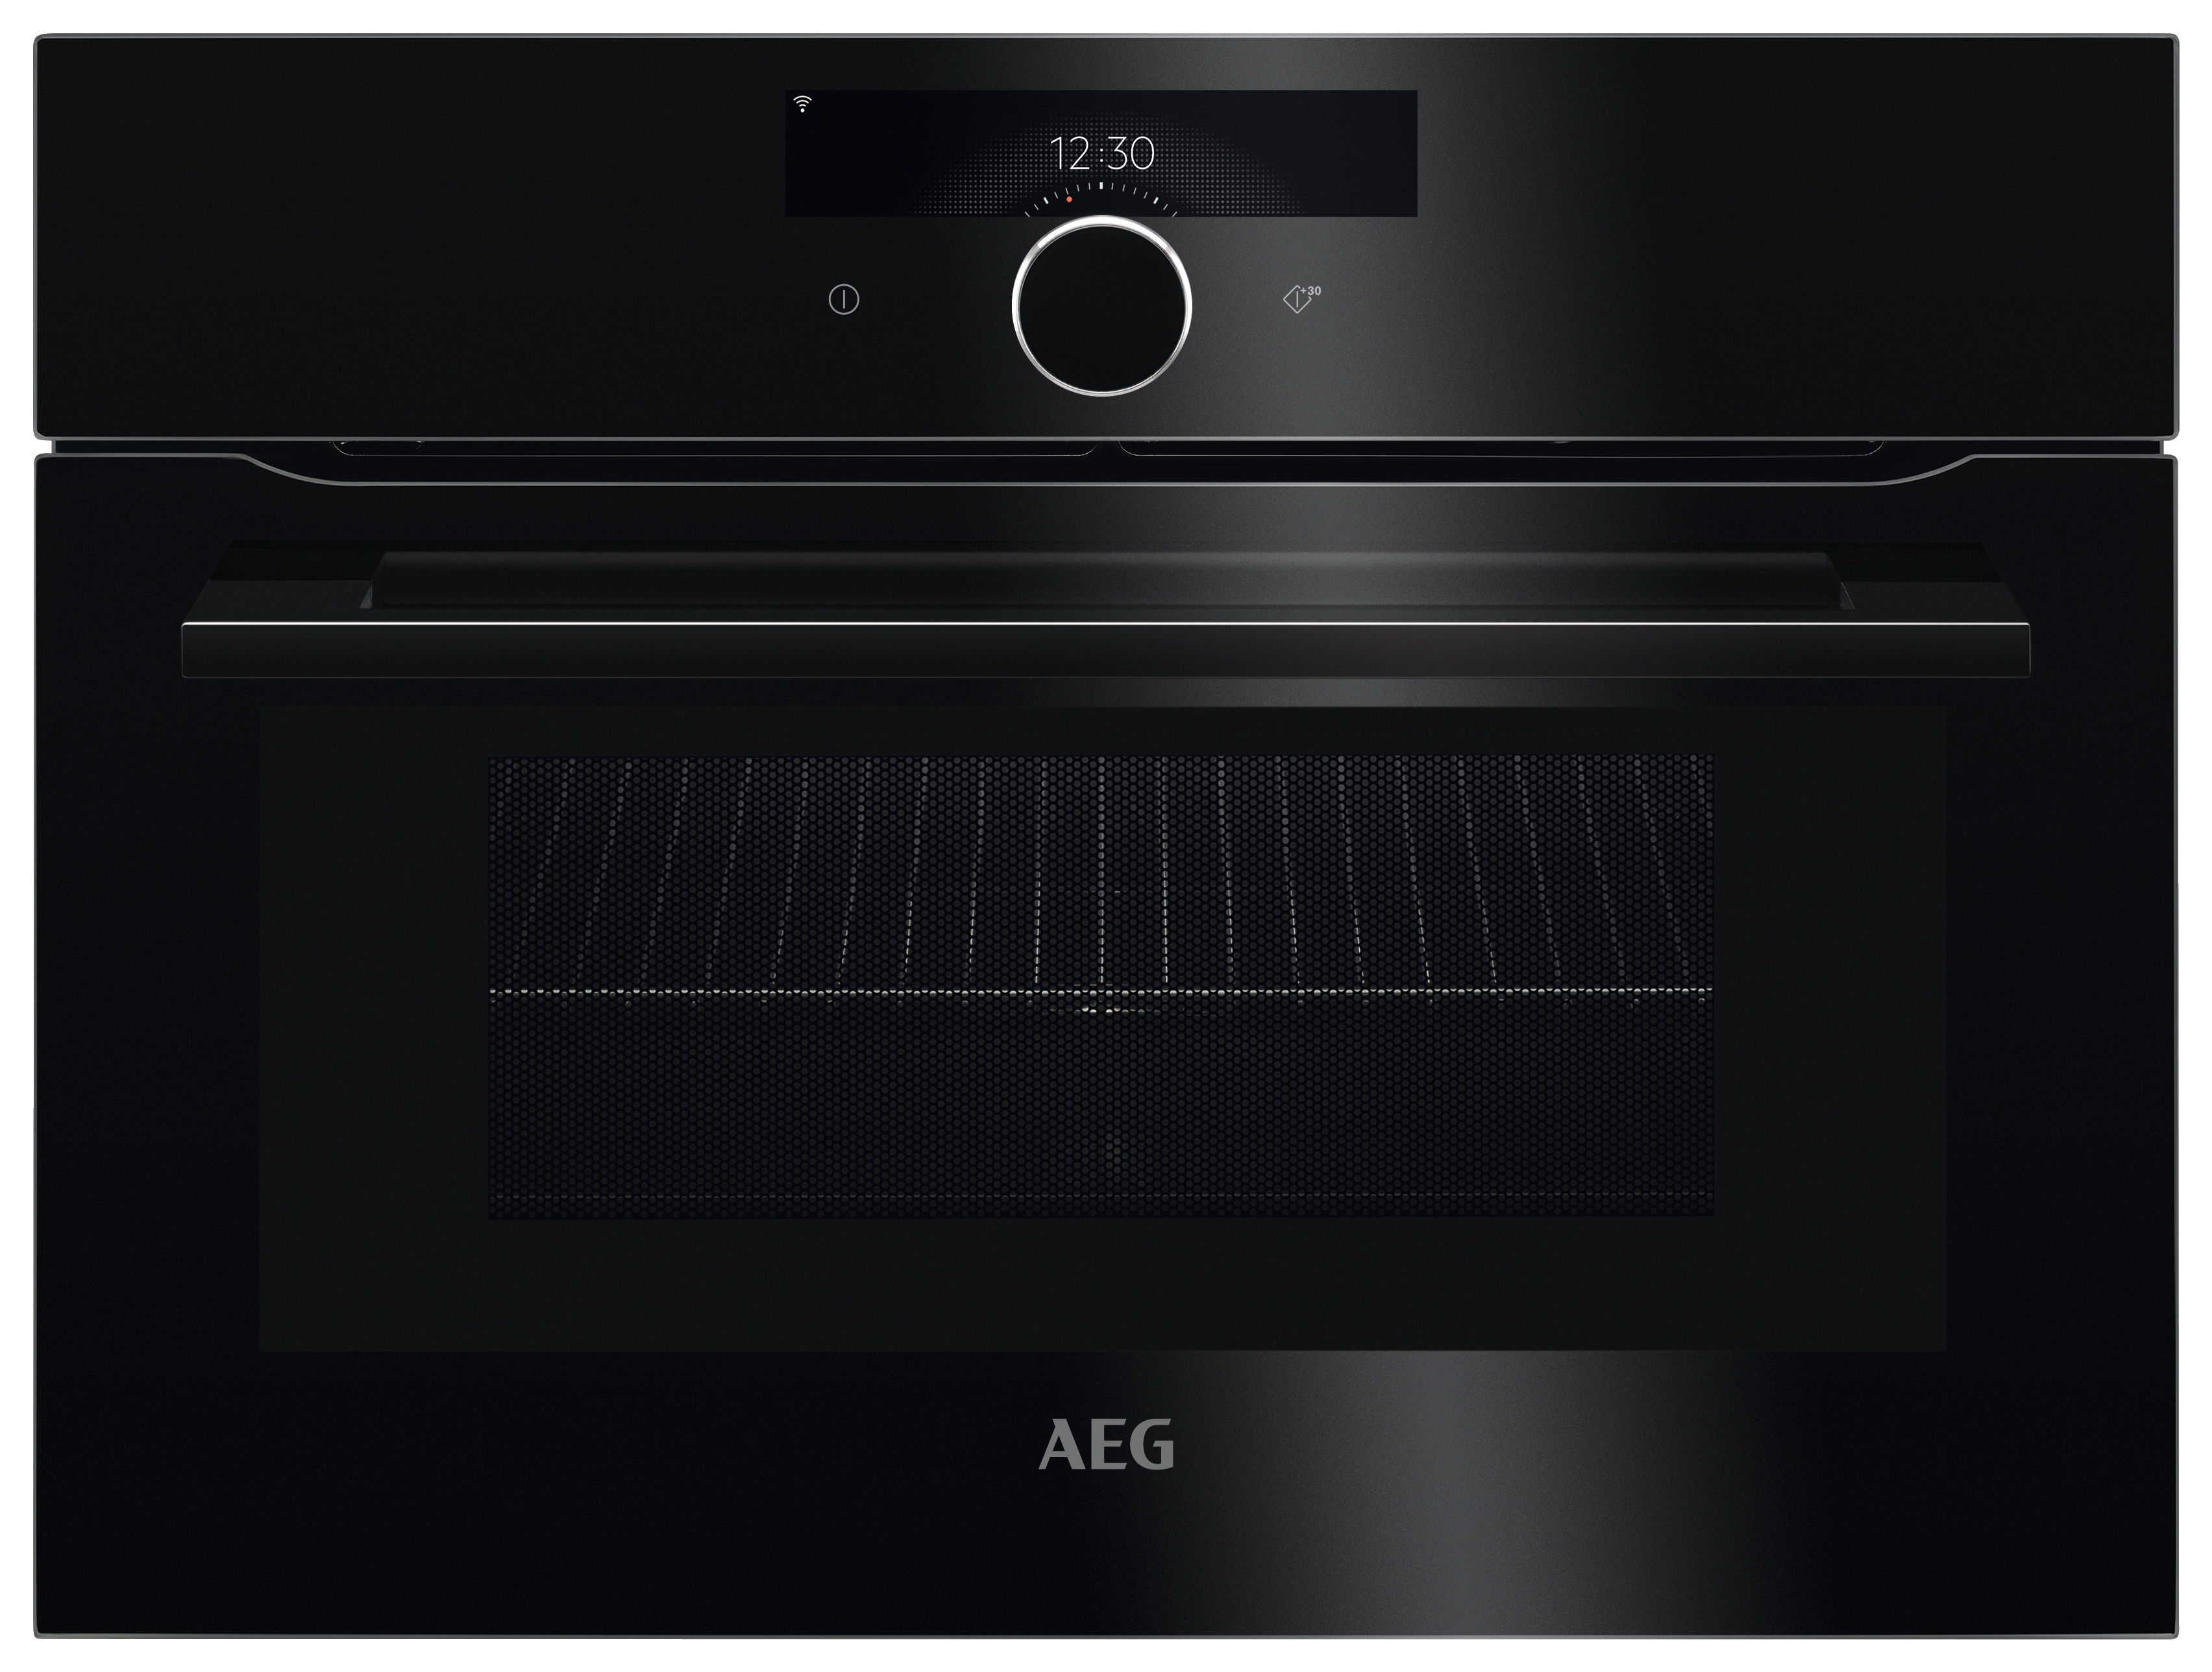 Image of AEG KMK968000B Connected CombiQuick Combination Microwave Compact Oven - Black